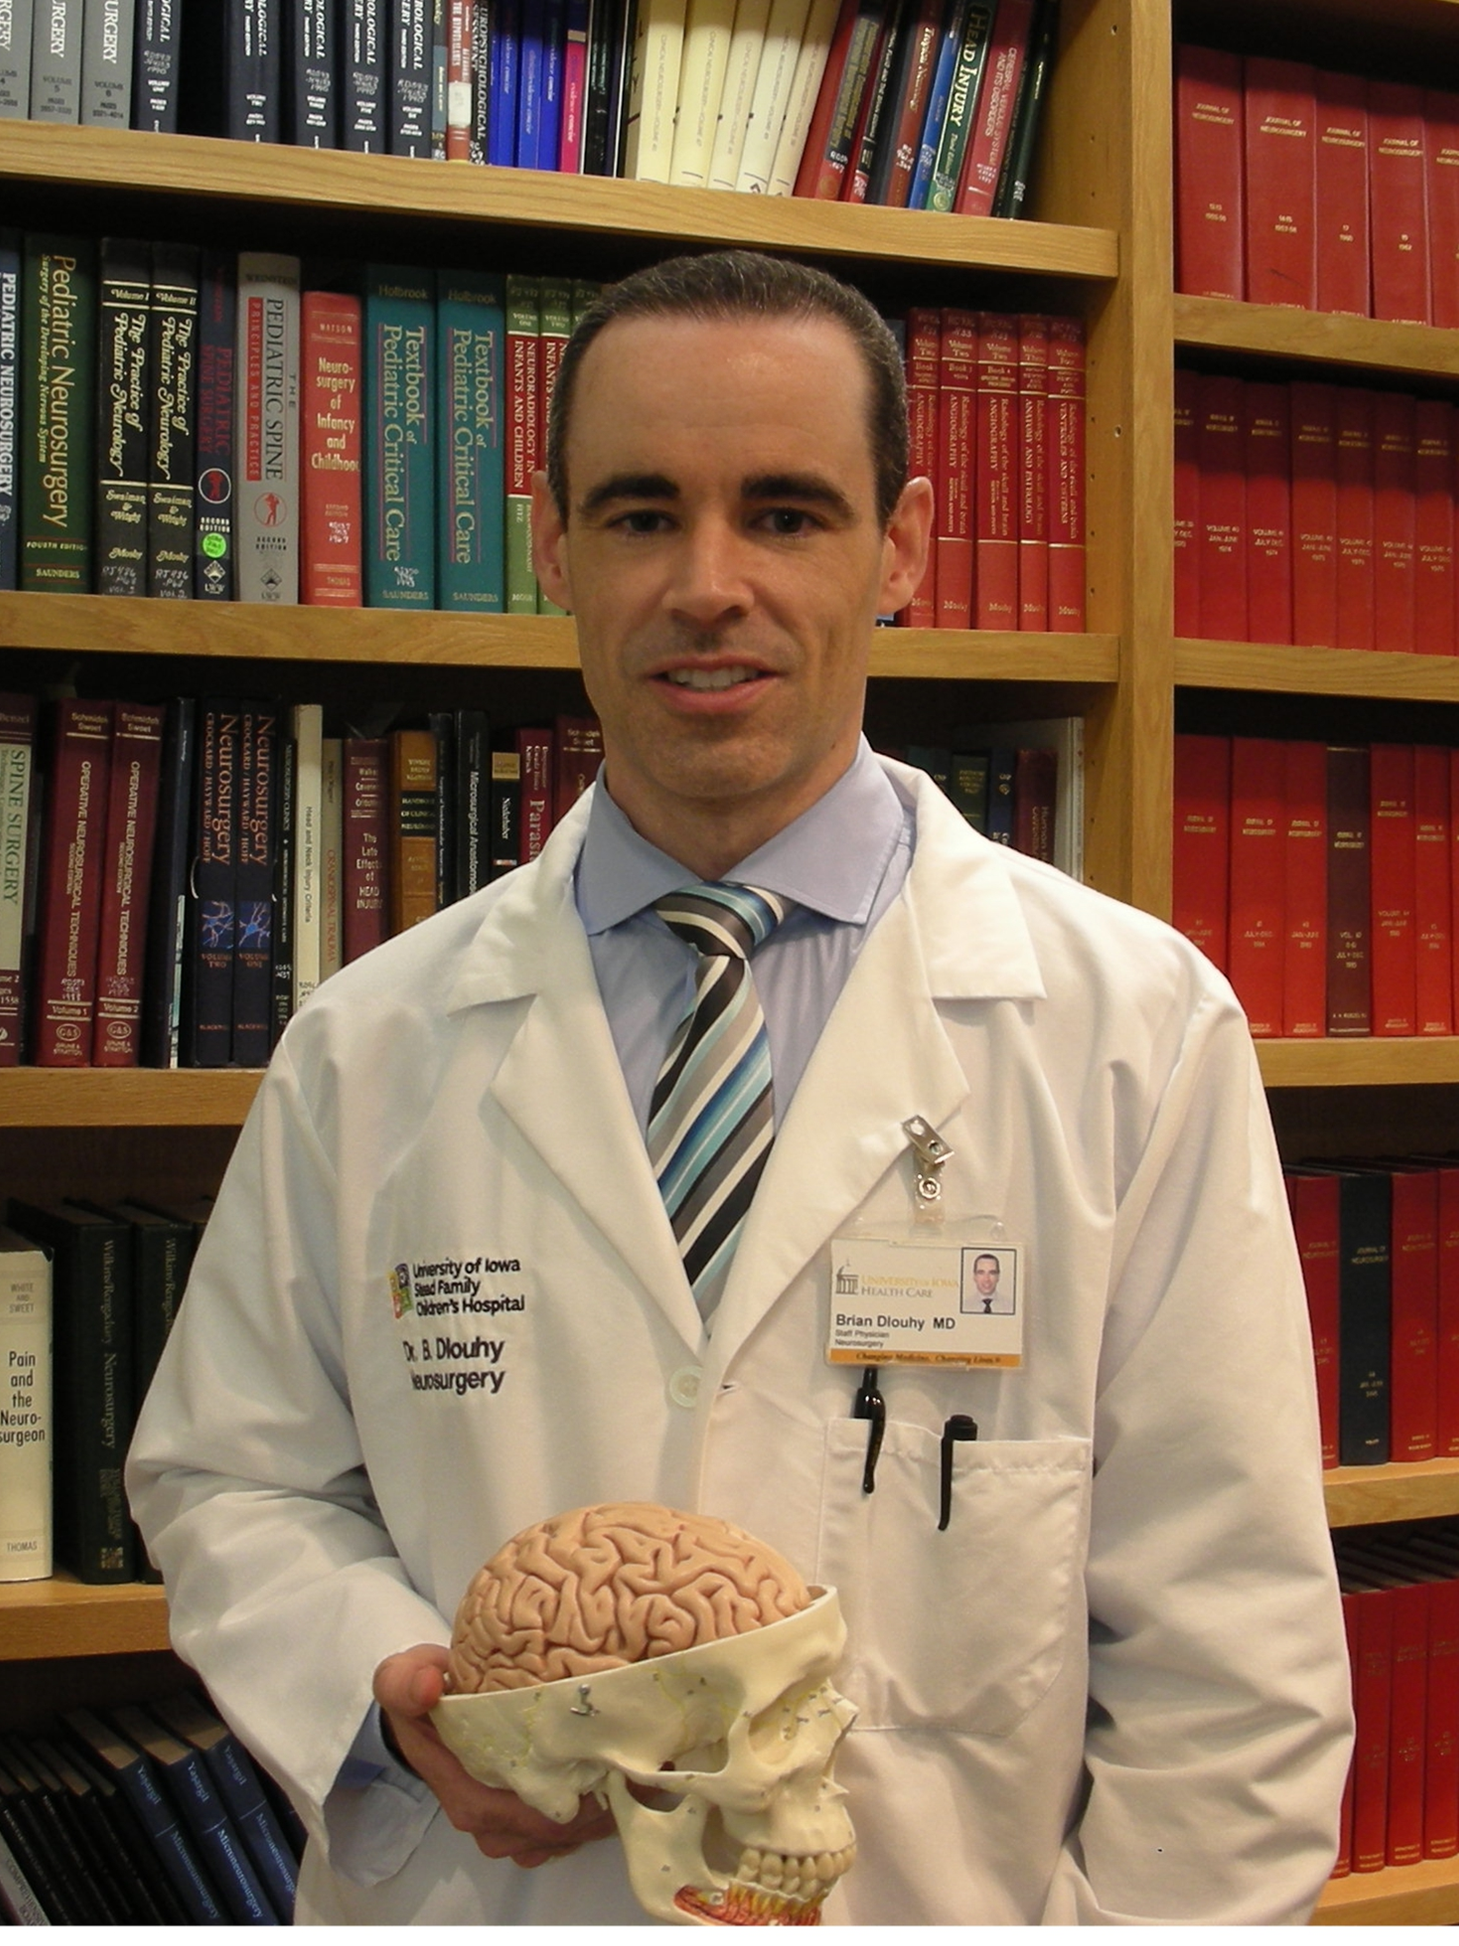 Brian Dlouhy, MD